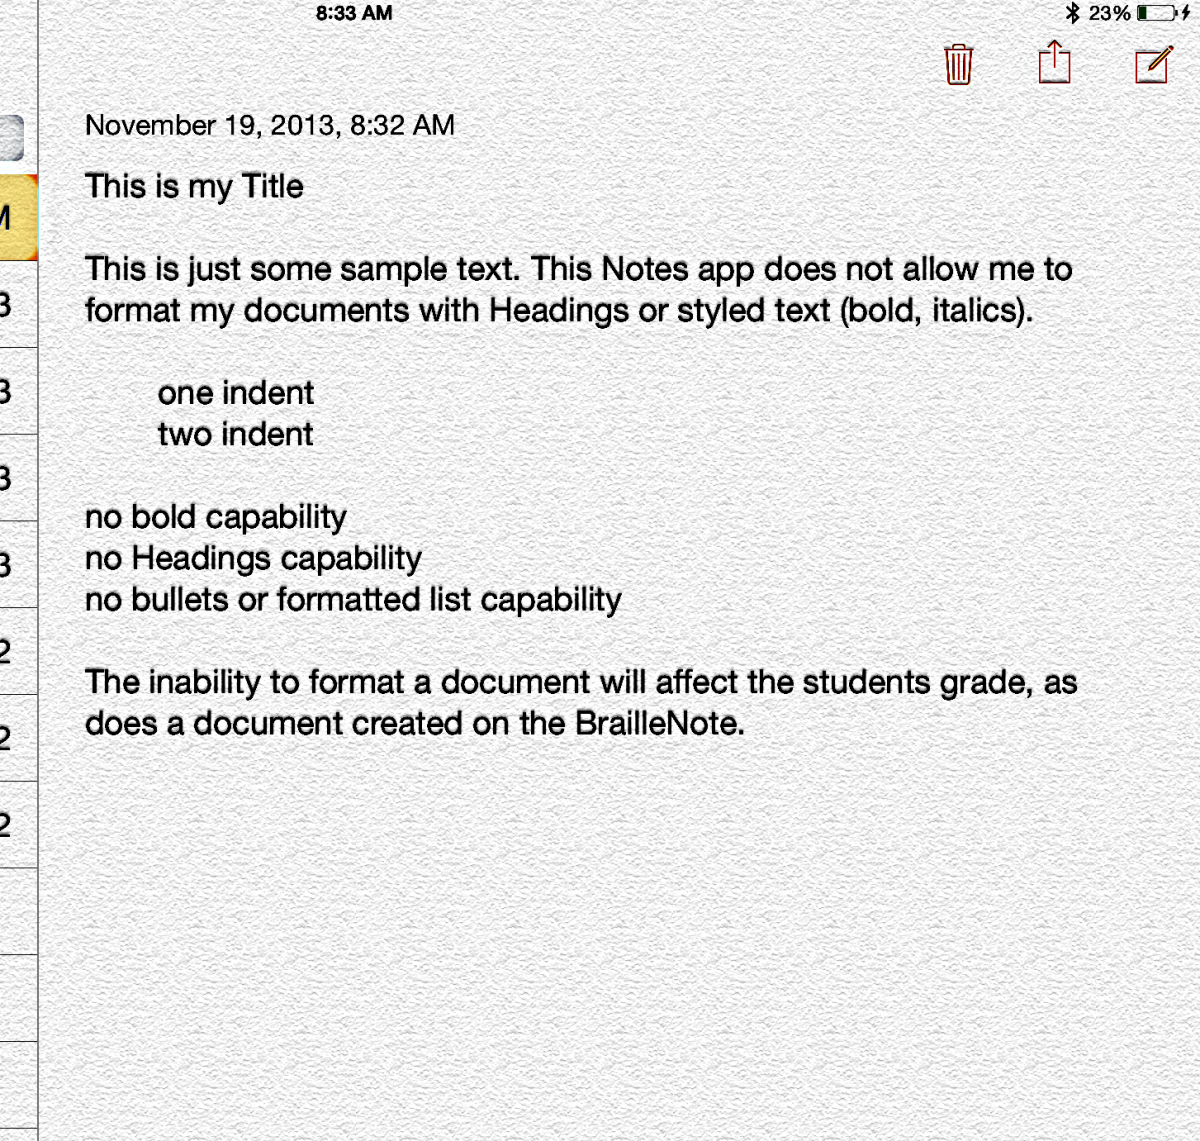 image of ios notes document